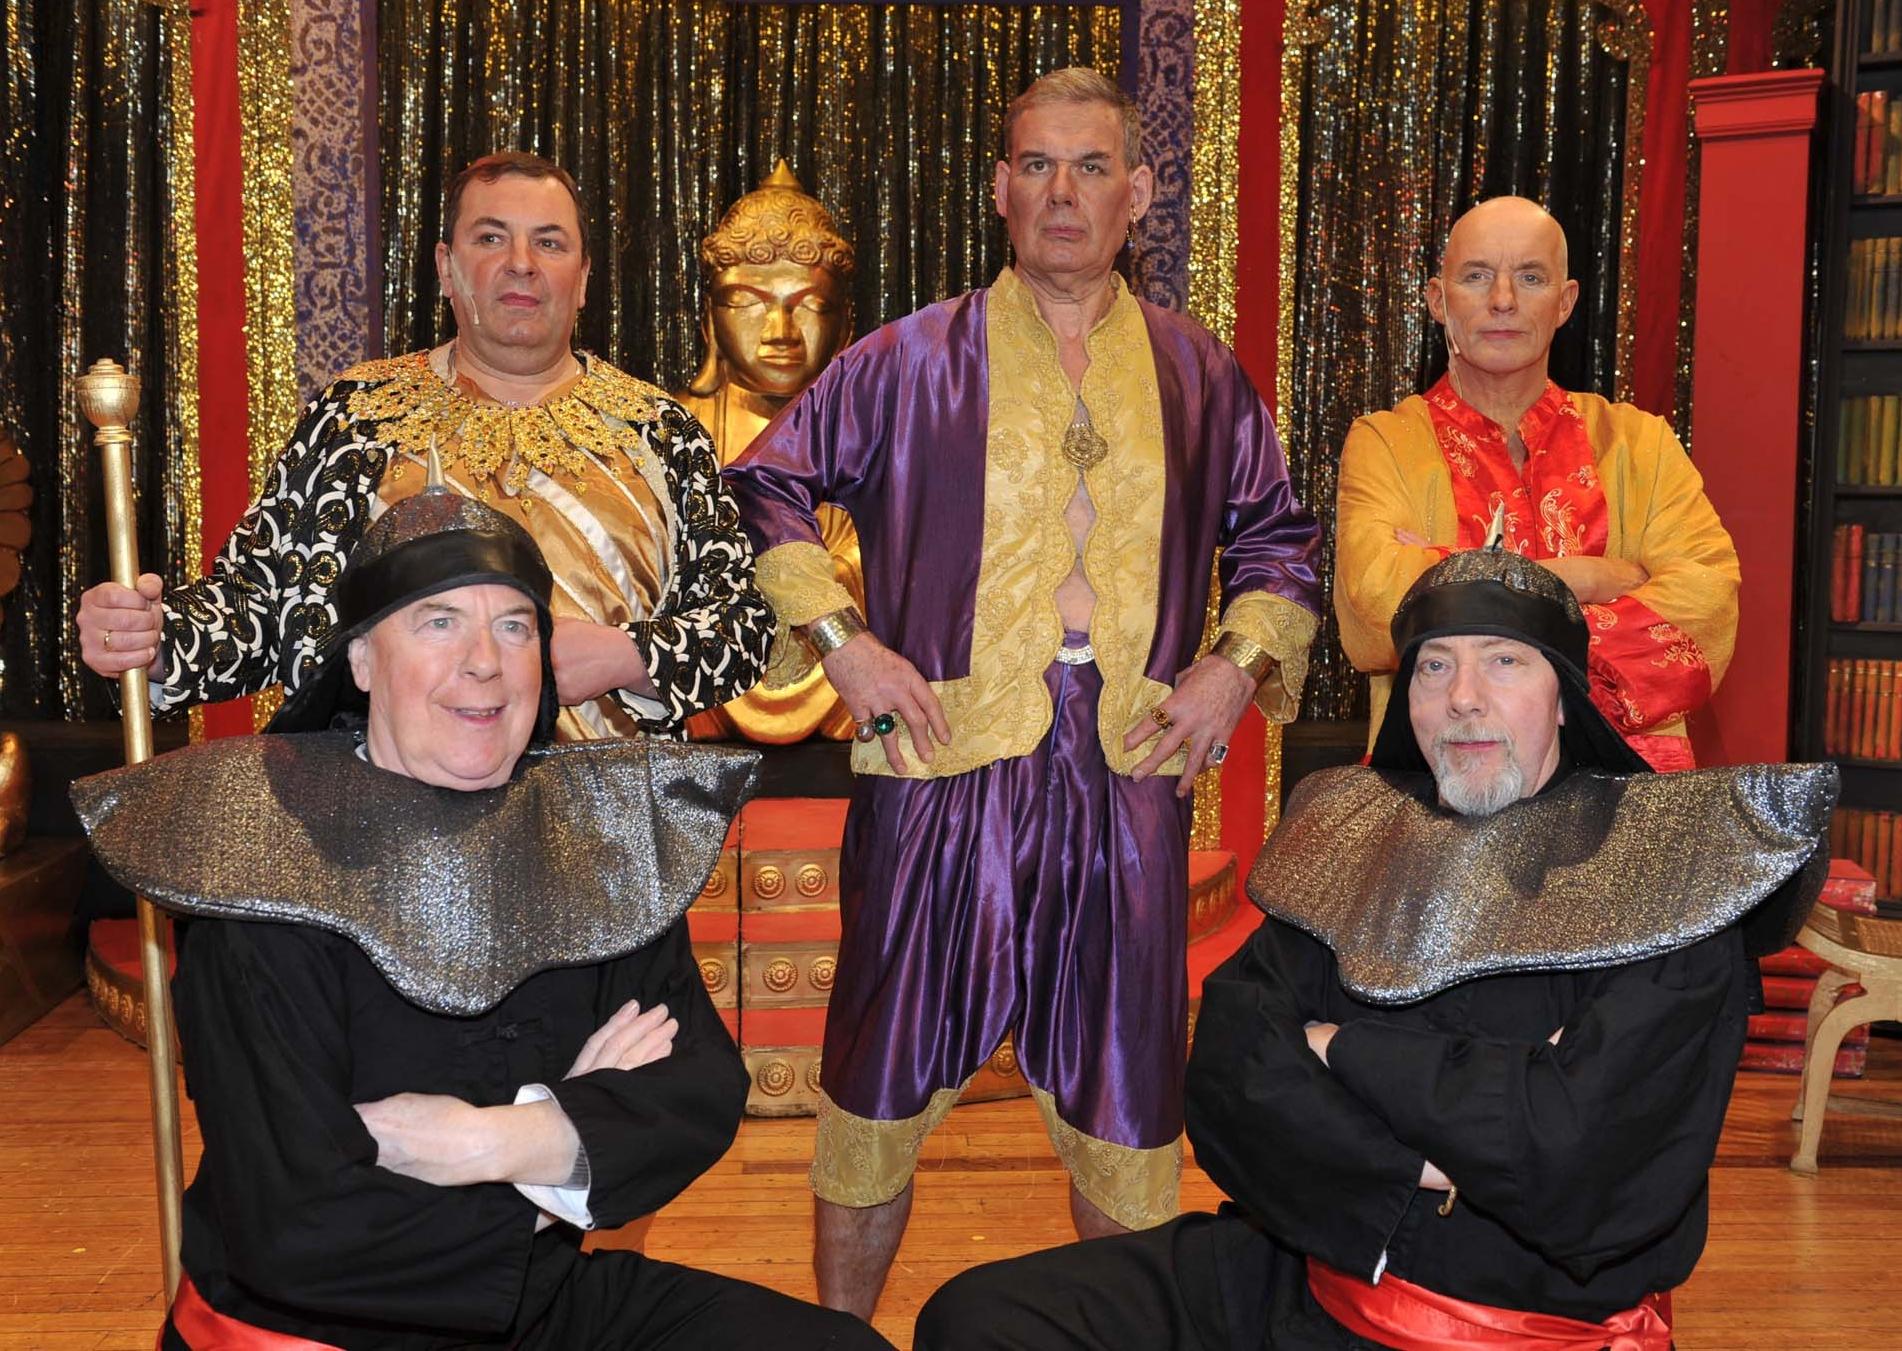 Selkirk Amateur Operatic Society presents 'The King and I' at The Victoria Hall. King with male household.